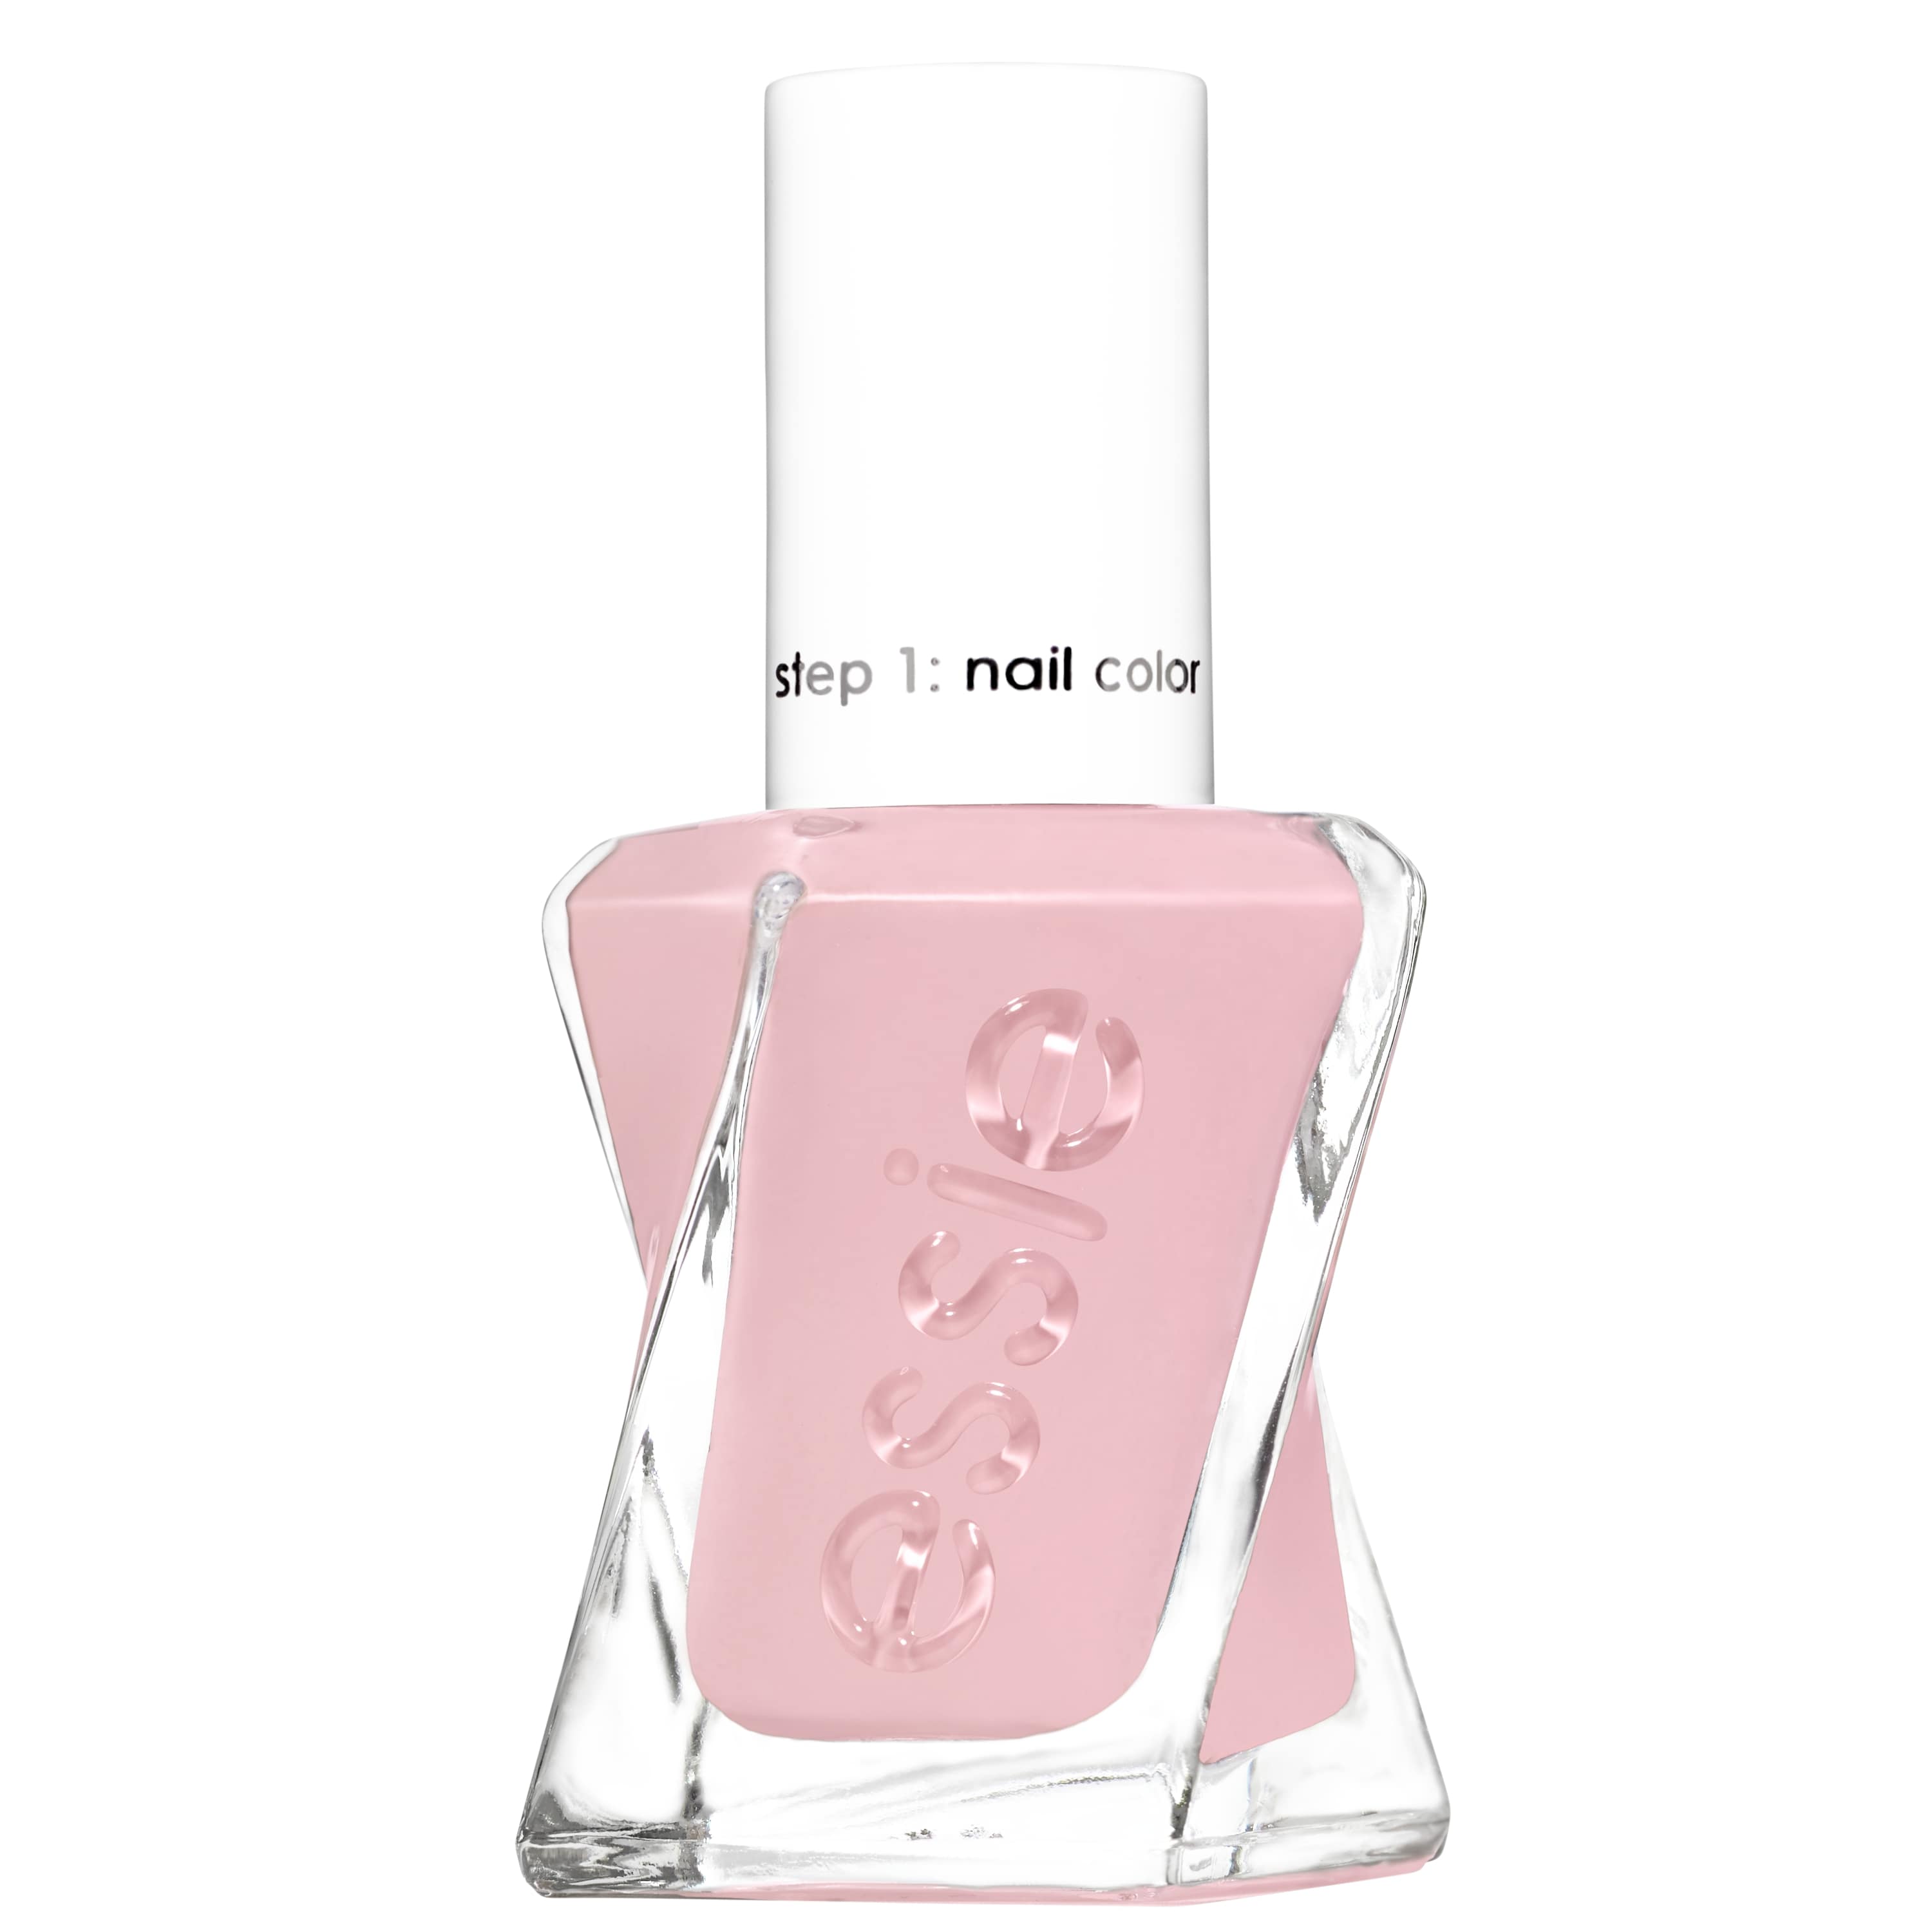  Gel Couture Nail Polish, 521 Polished And Poised